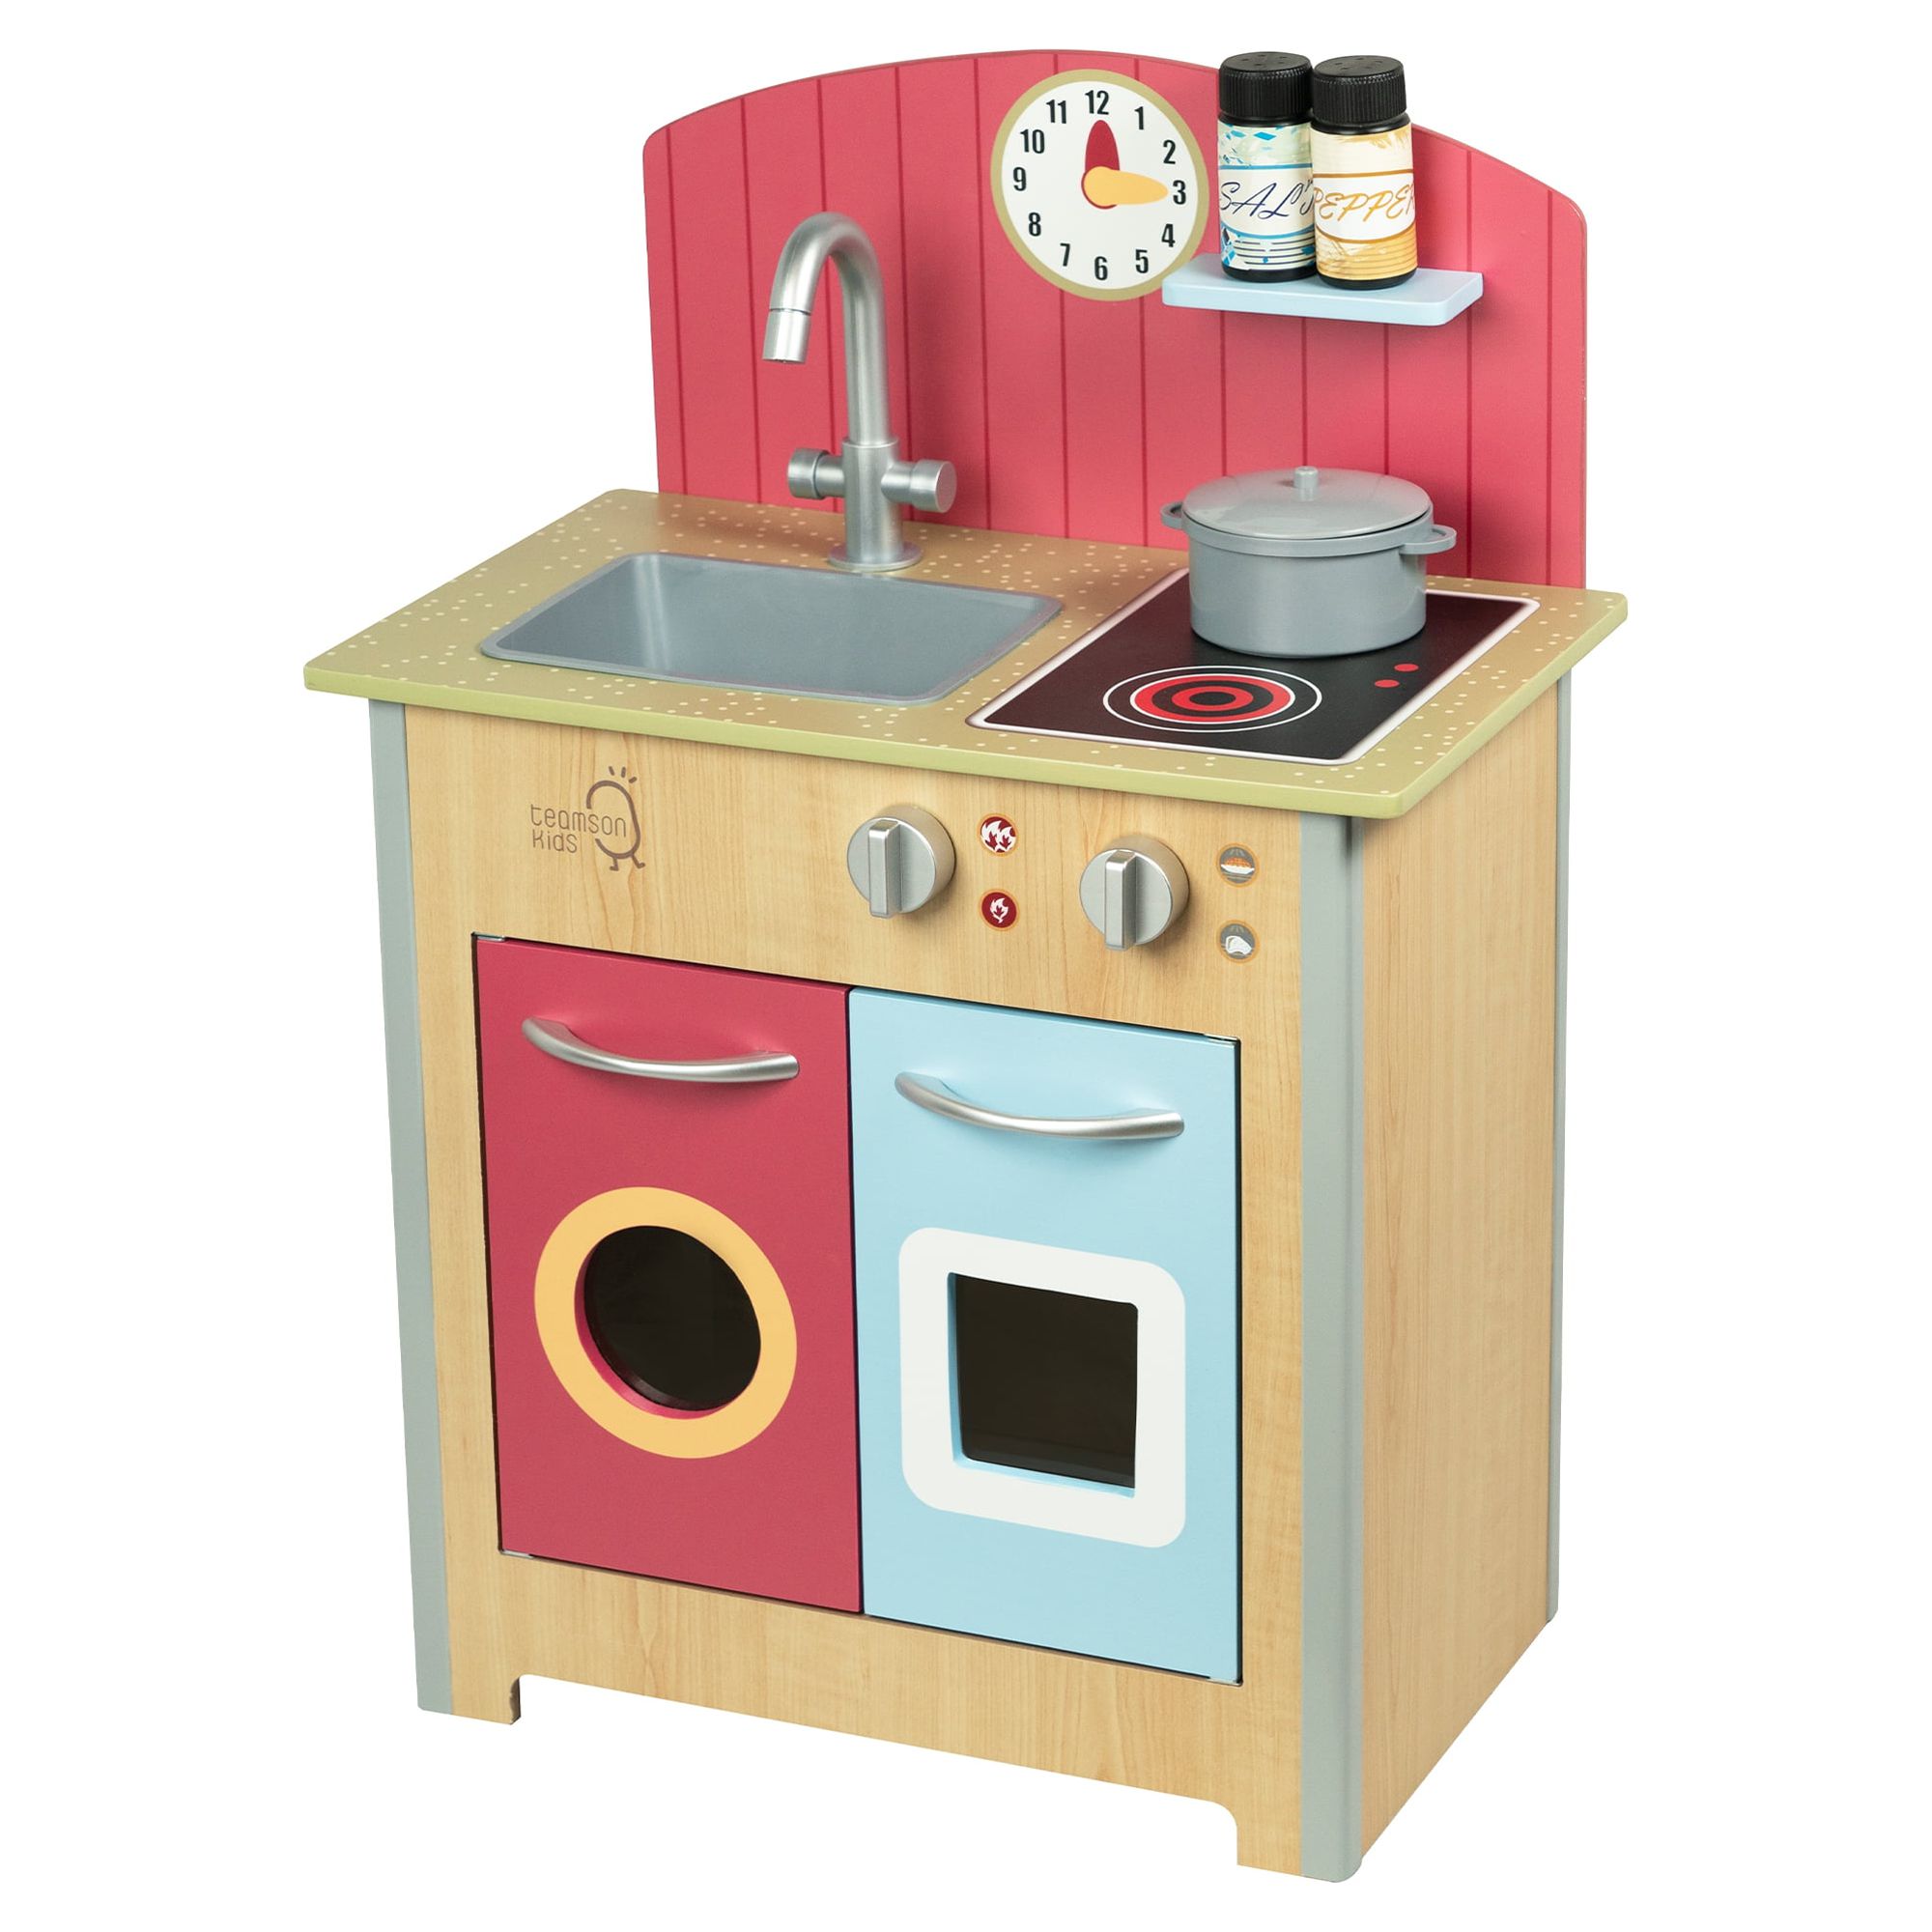 Teamson Kids Little Chef Porto Classic Wooden Kitchen Playset, Natural/Red - image 1 of 11